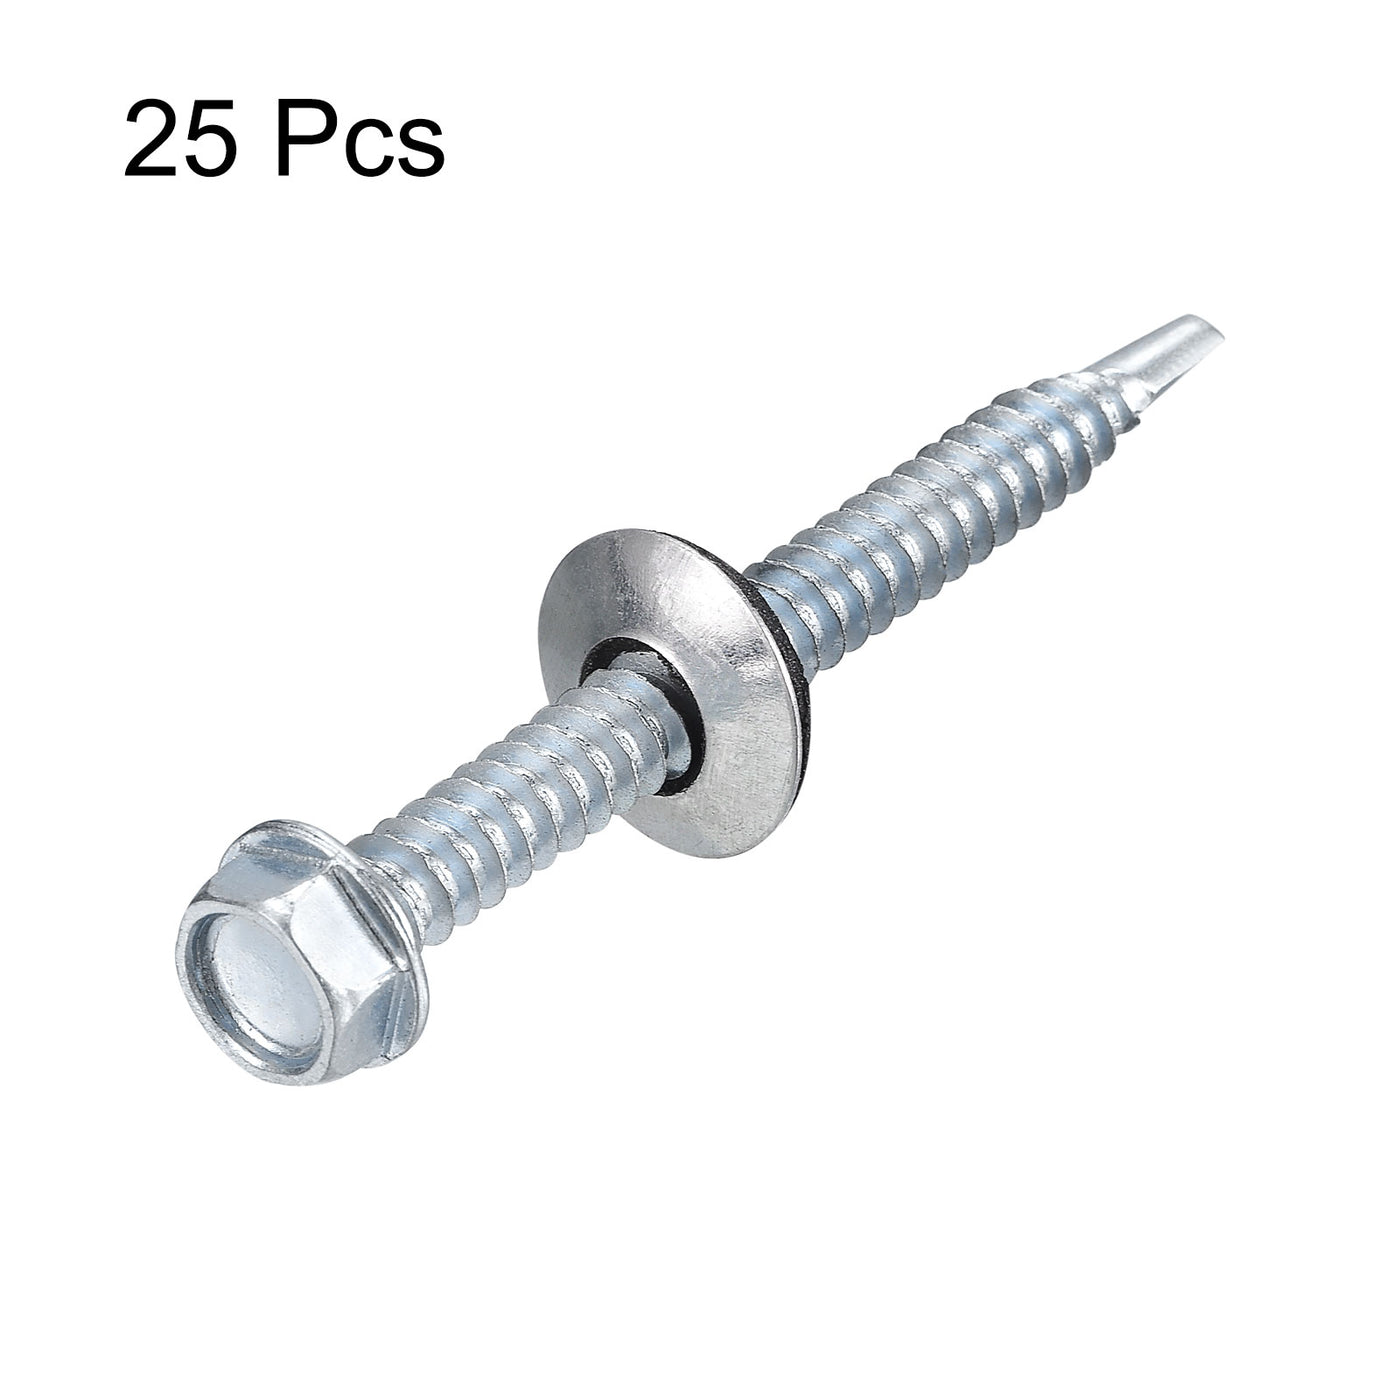 uxcell Uxcell #14 x 2-1/2" Self Drilling Screws, 25pcs Roofing Screws with EPDM Washer